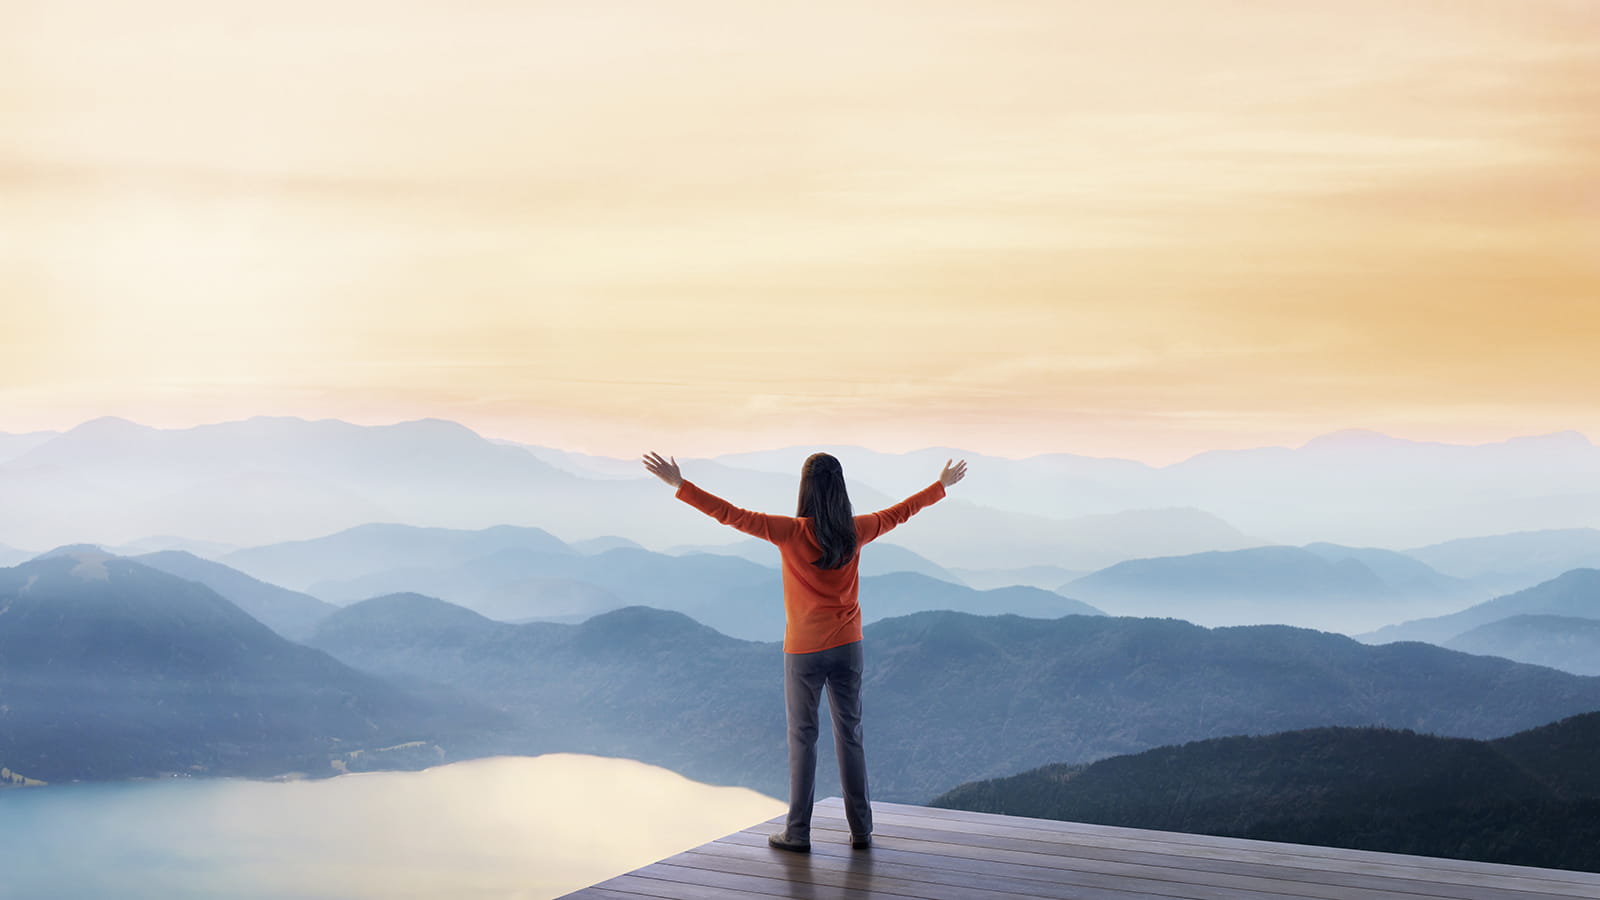 Woman with arms outstretched looking at a mountainous landscape